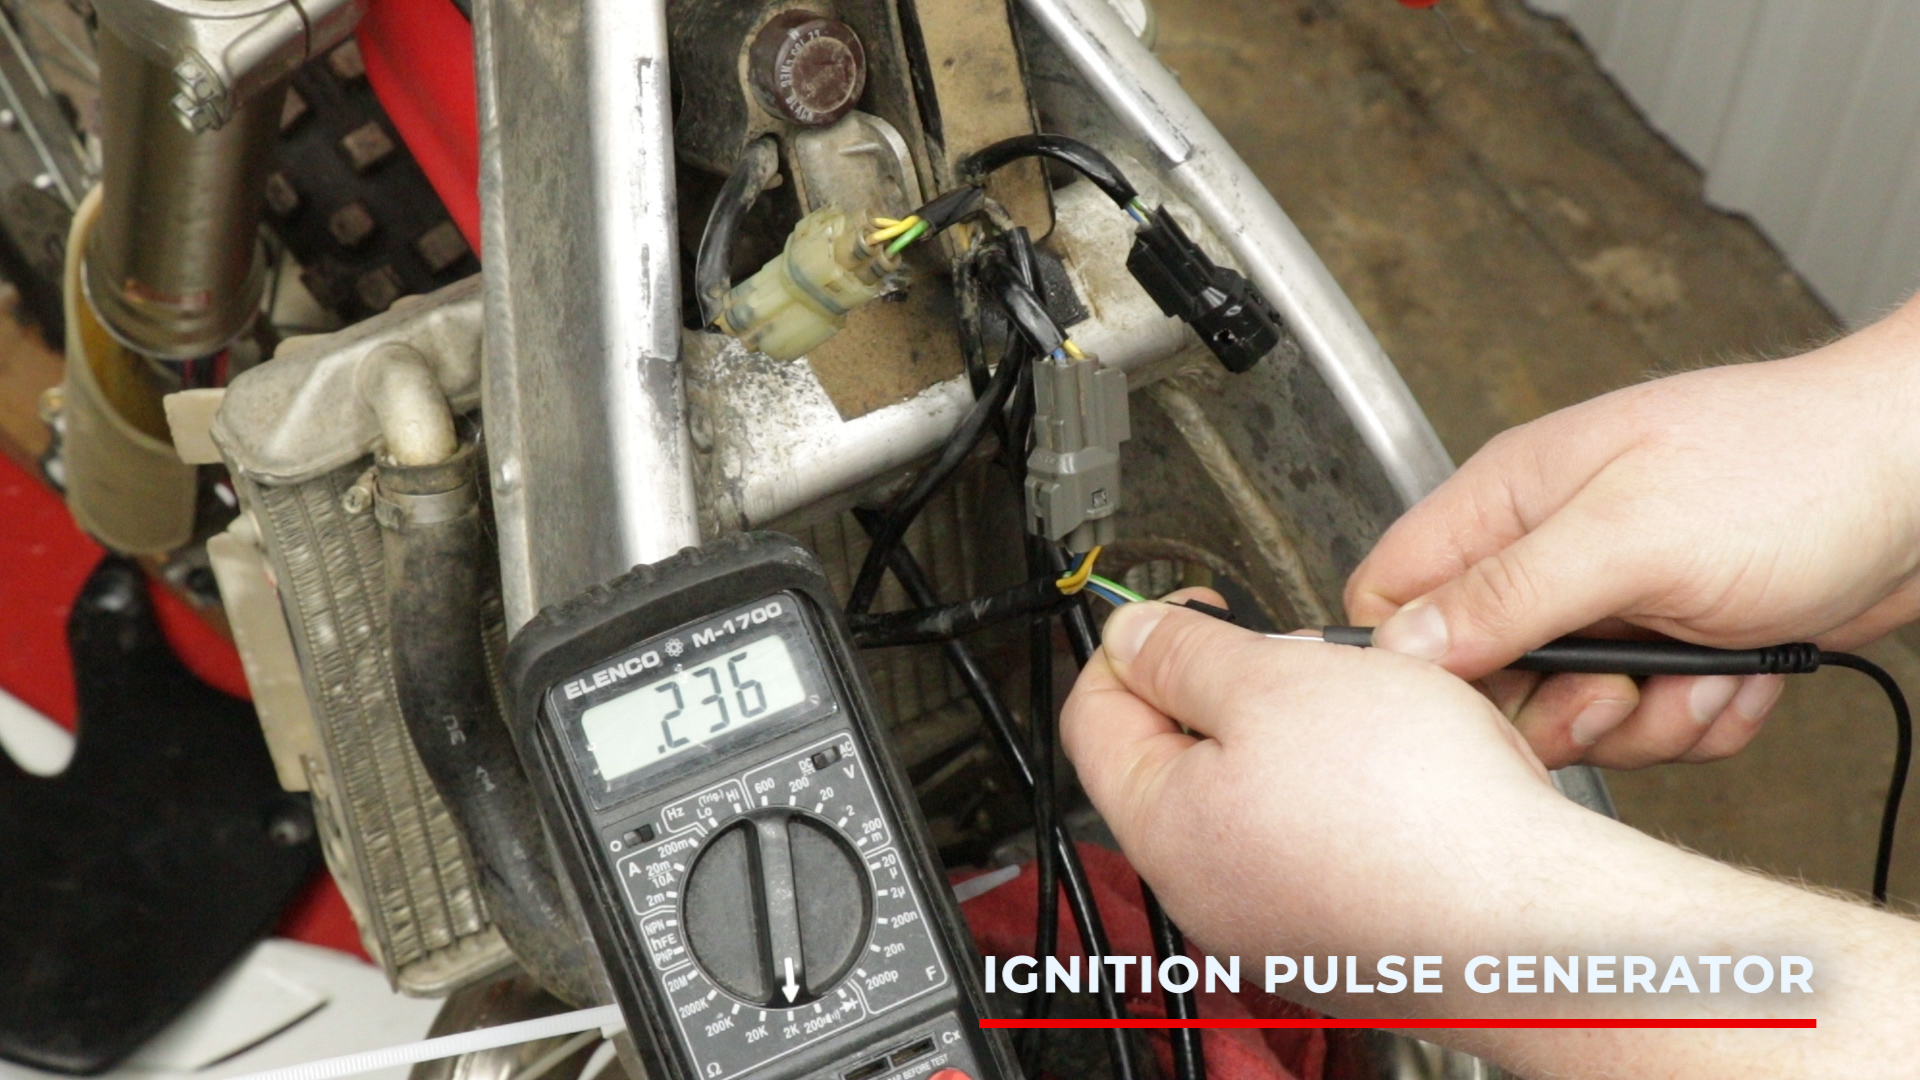 Test The Ignition Pulse Generator Resistance Between The Blue-Yellow And Green-White Wire Terminals